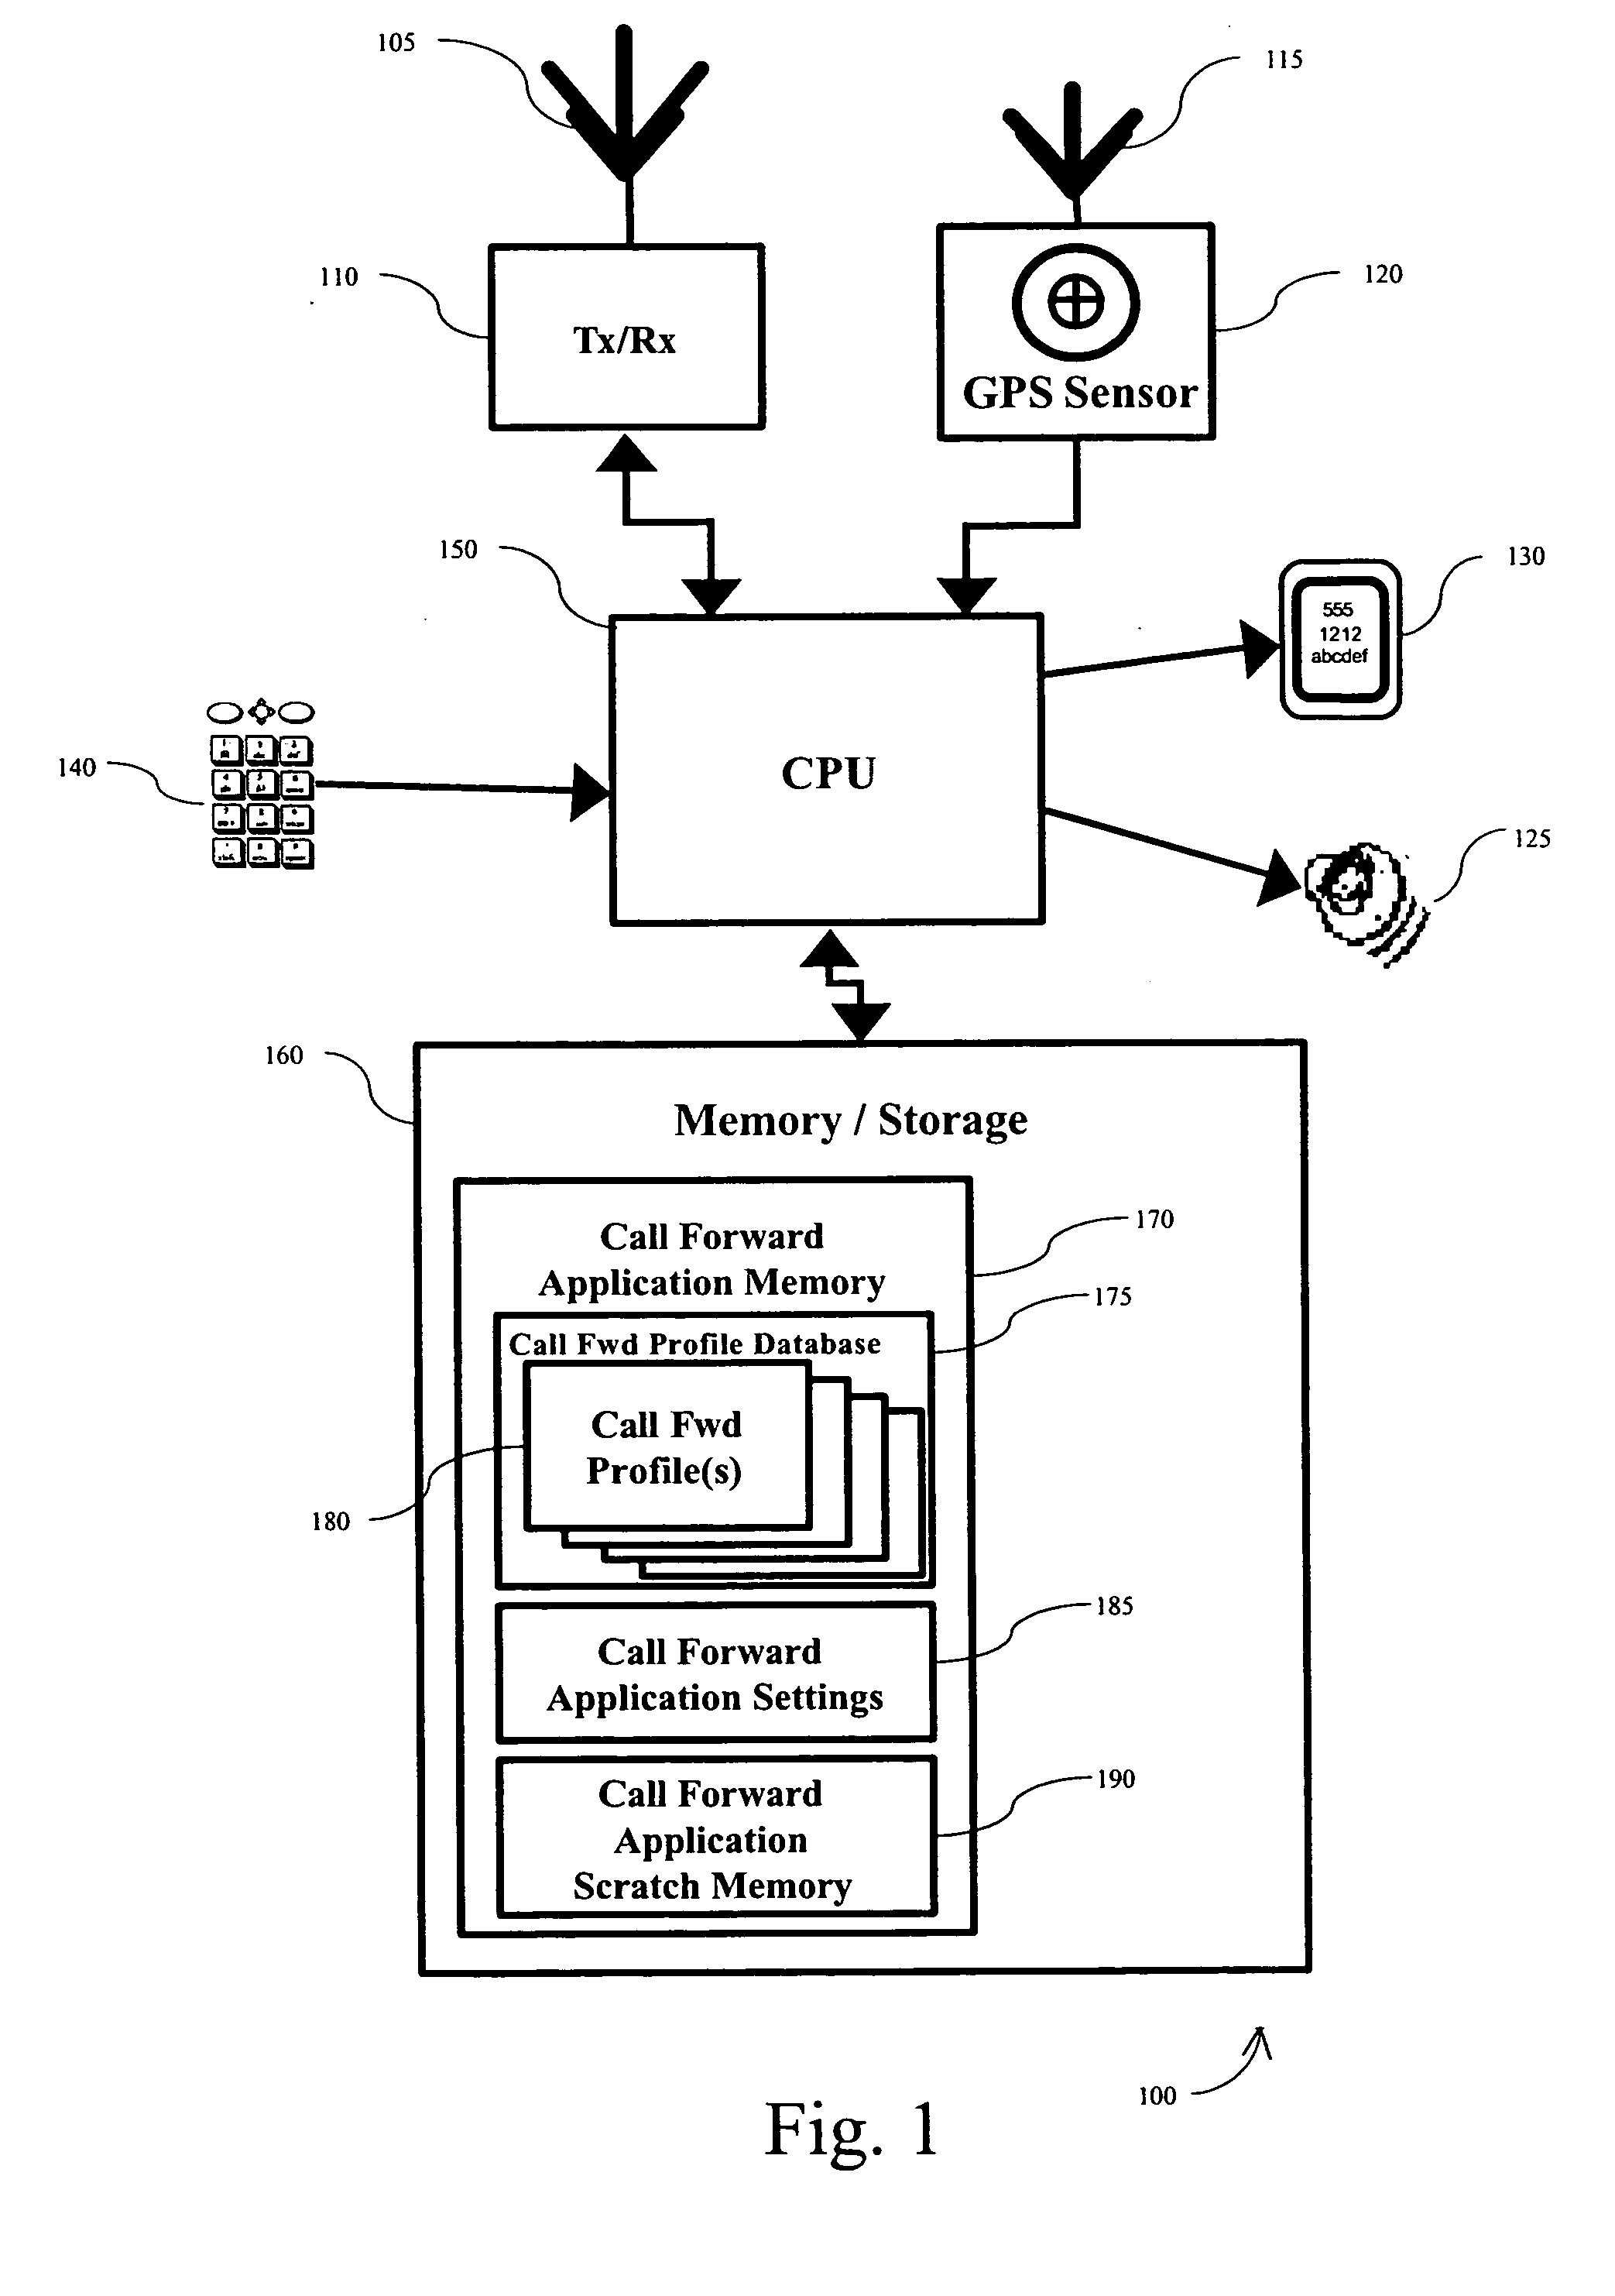 Automatic mobile call forwarding with time-based and location-based trigger events